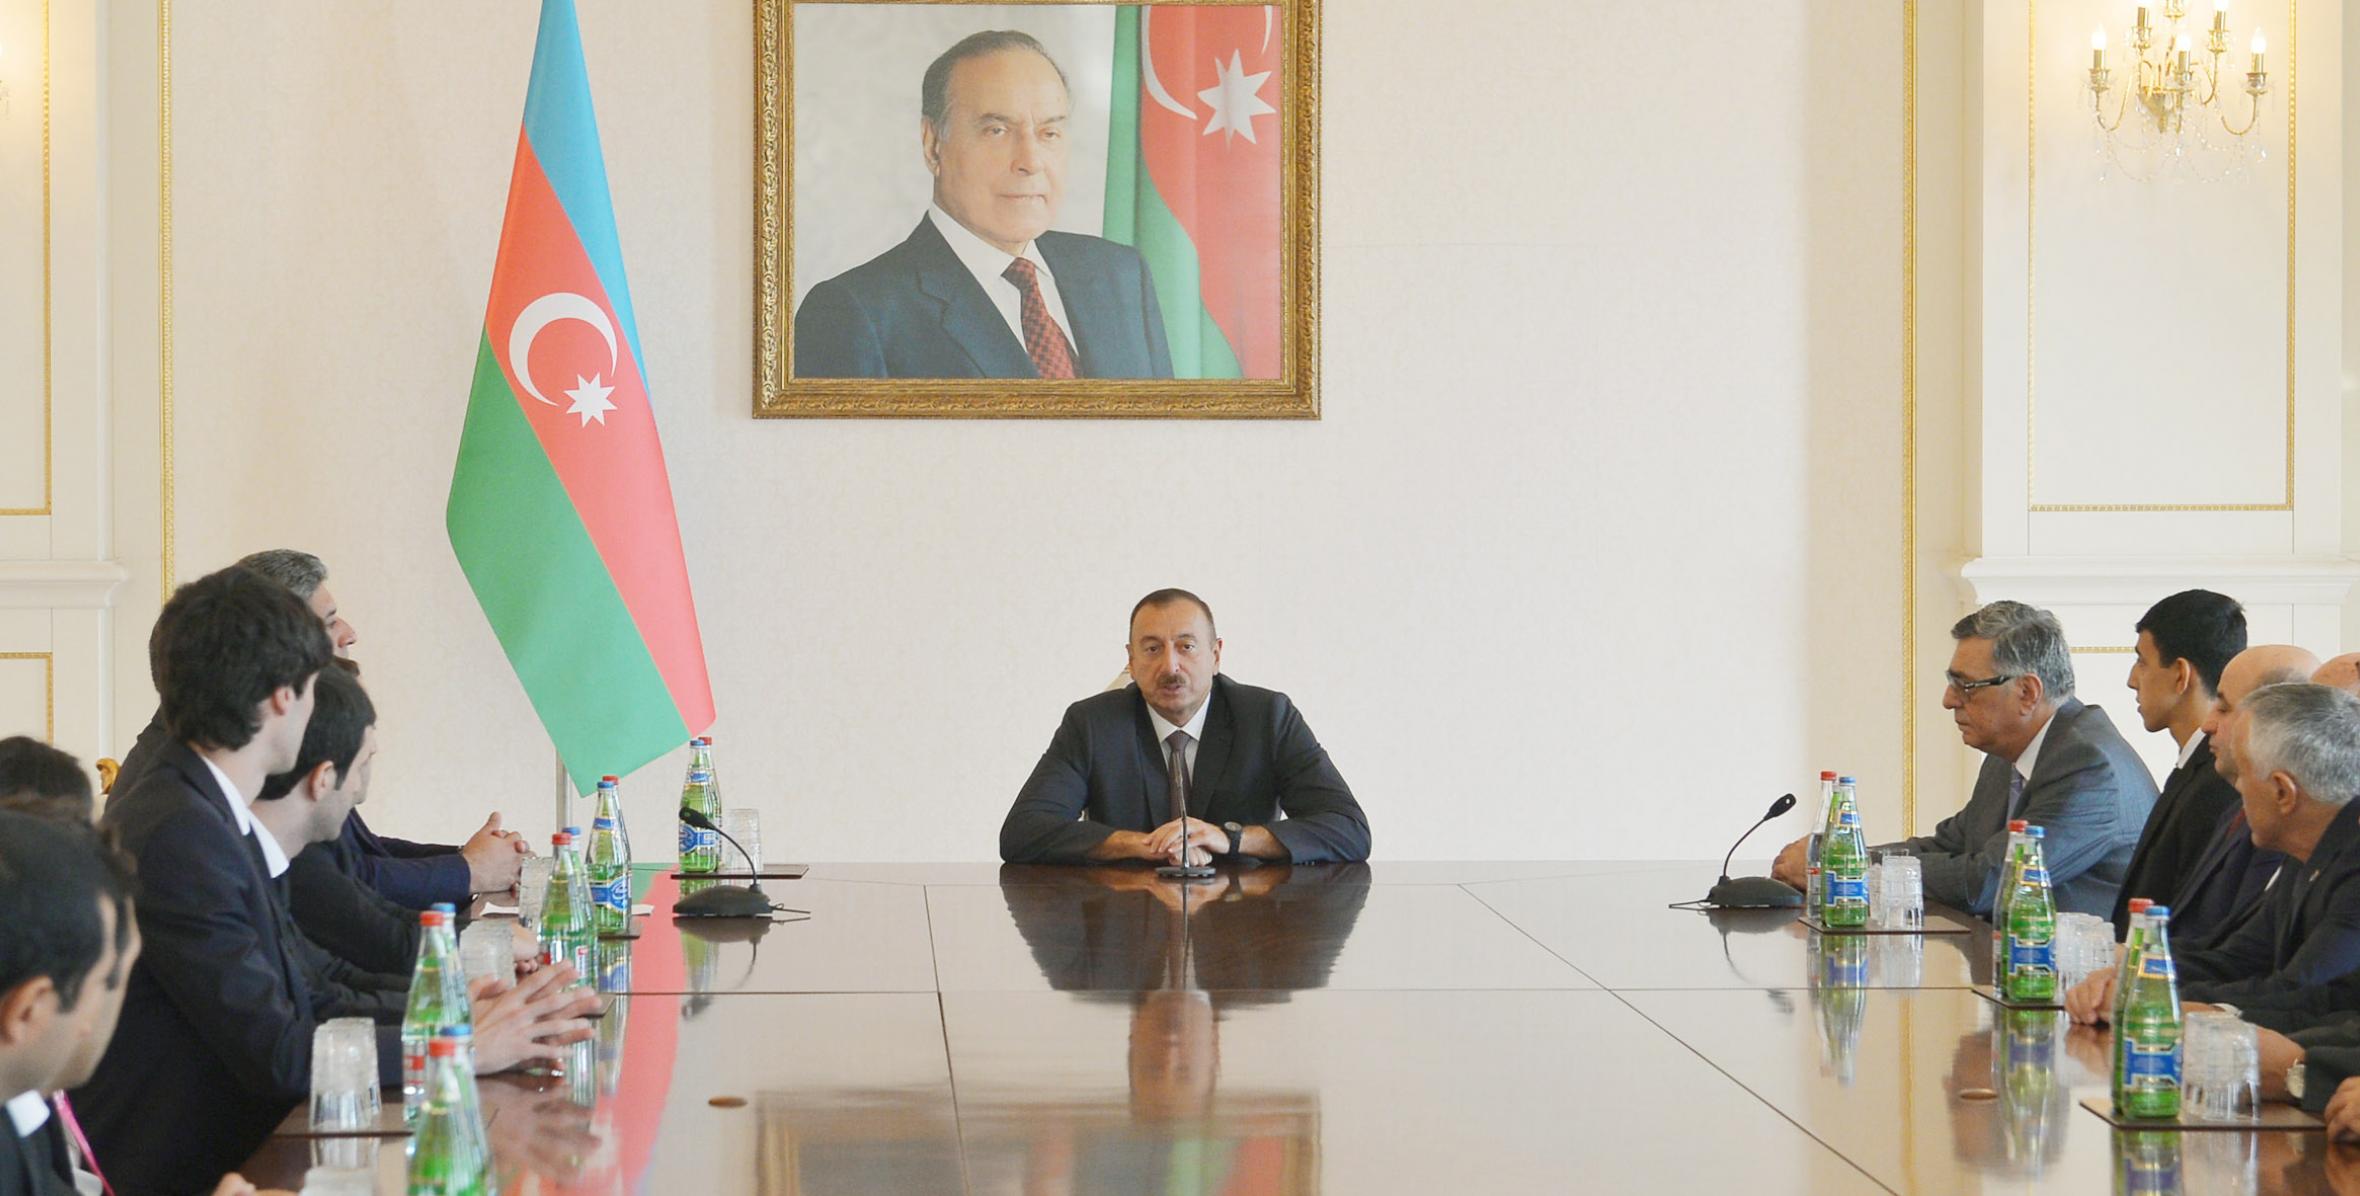 Ilham Aliyev received members of the national team who participated in the 2nd Summer Youth Olympic Games in Nanjing